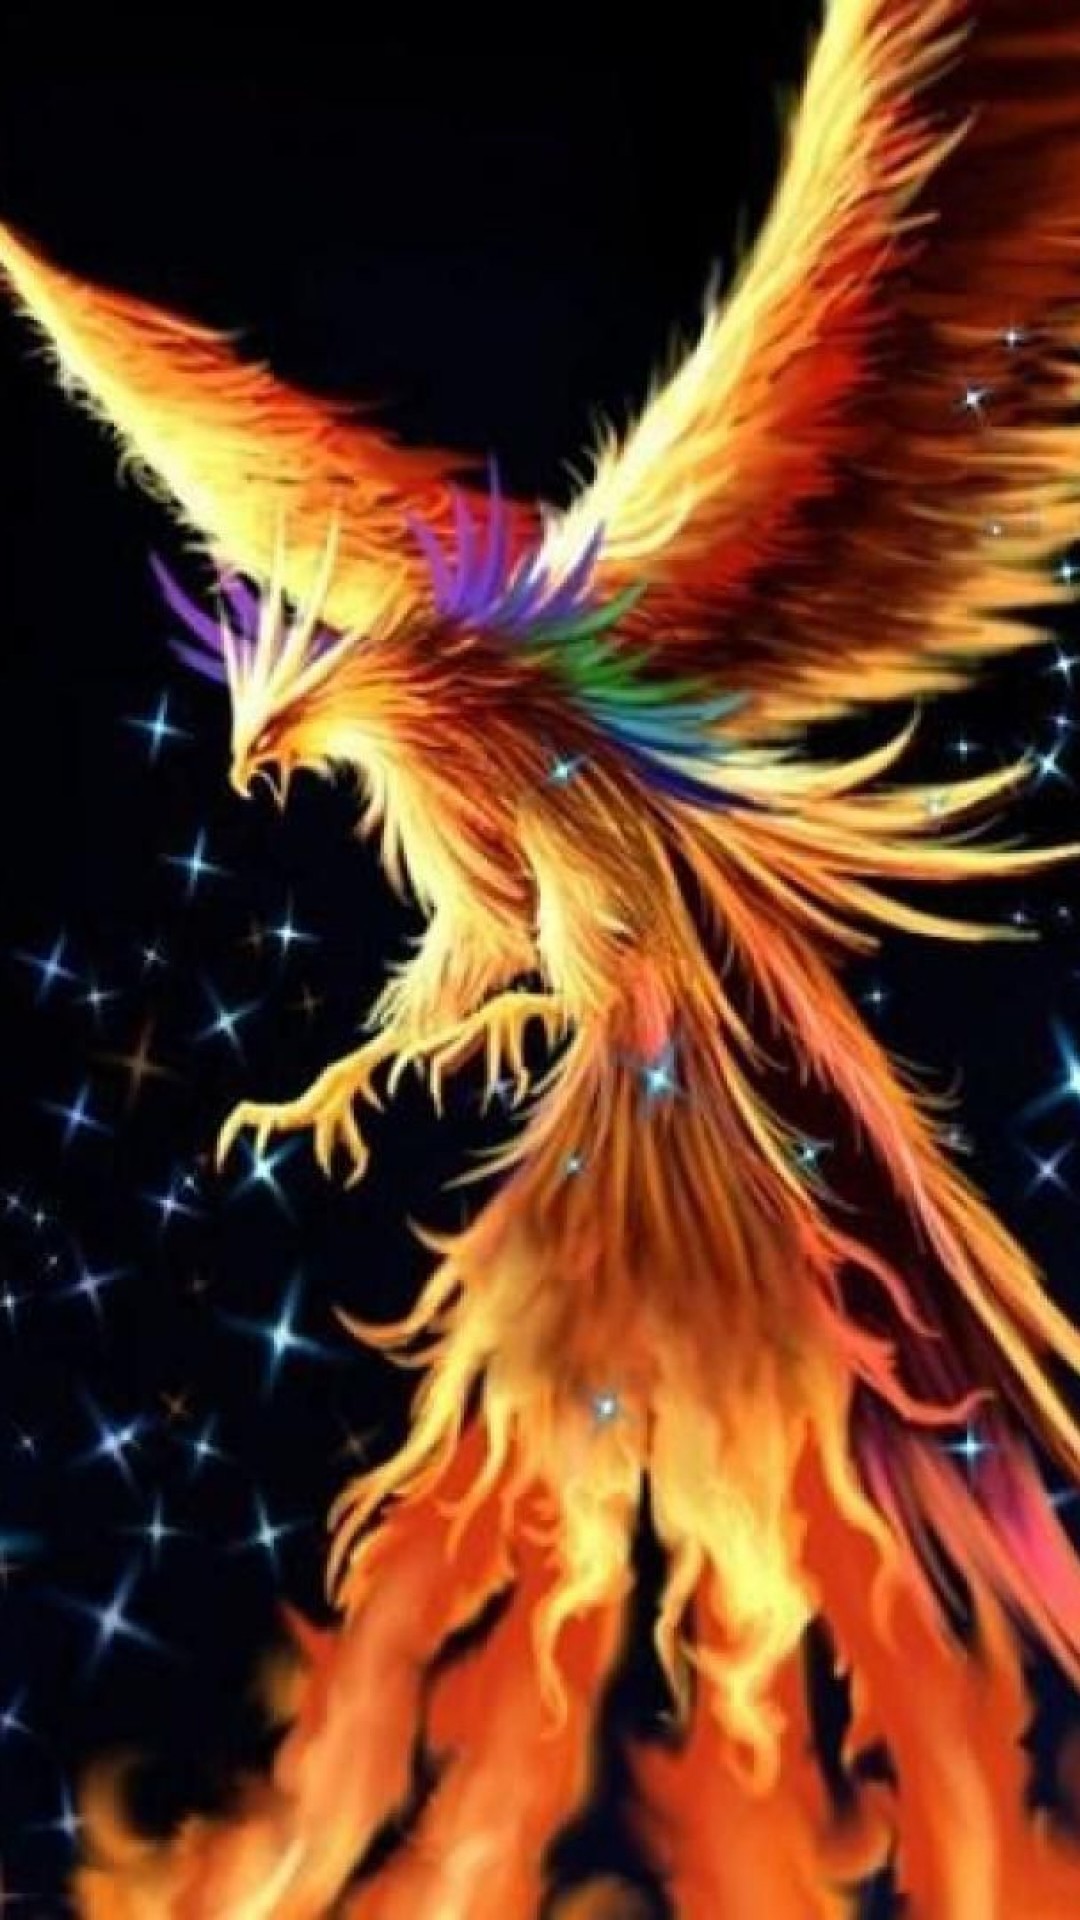 1080x1920  Wallpapers Phone Phoenix Bird with image resolution   pixel. You can make this wallpaper for